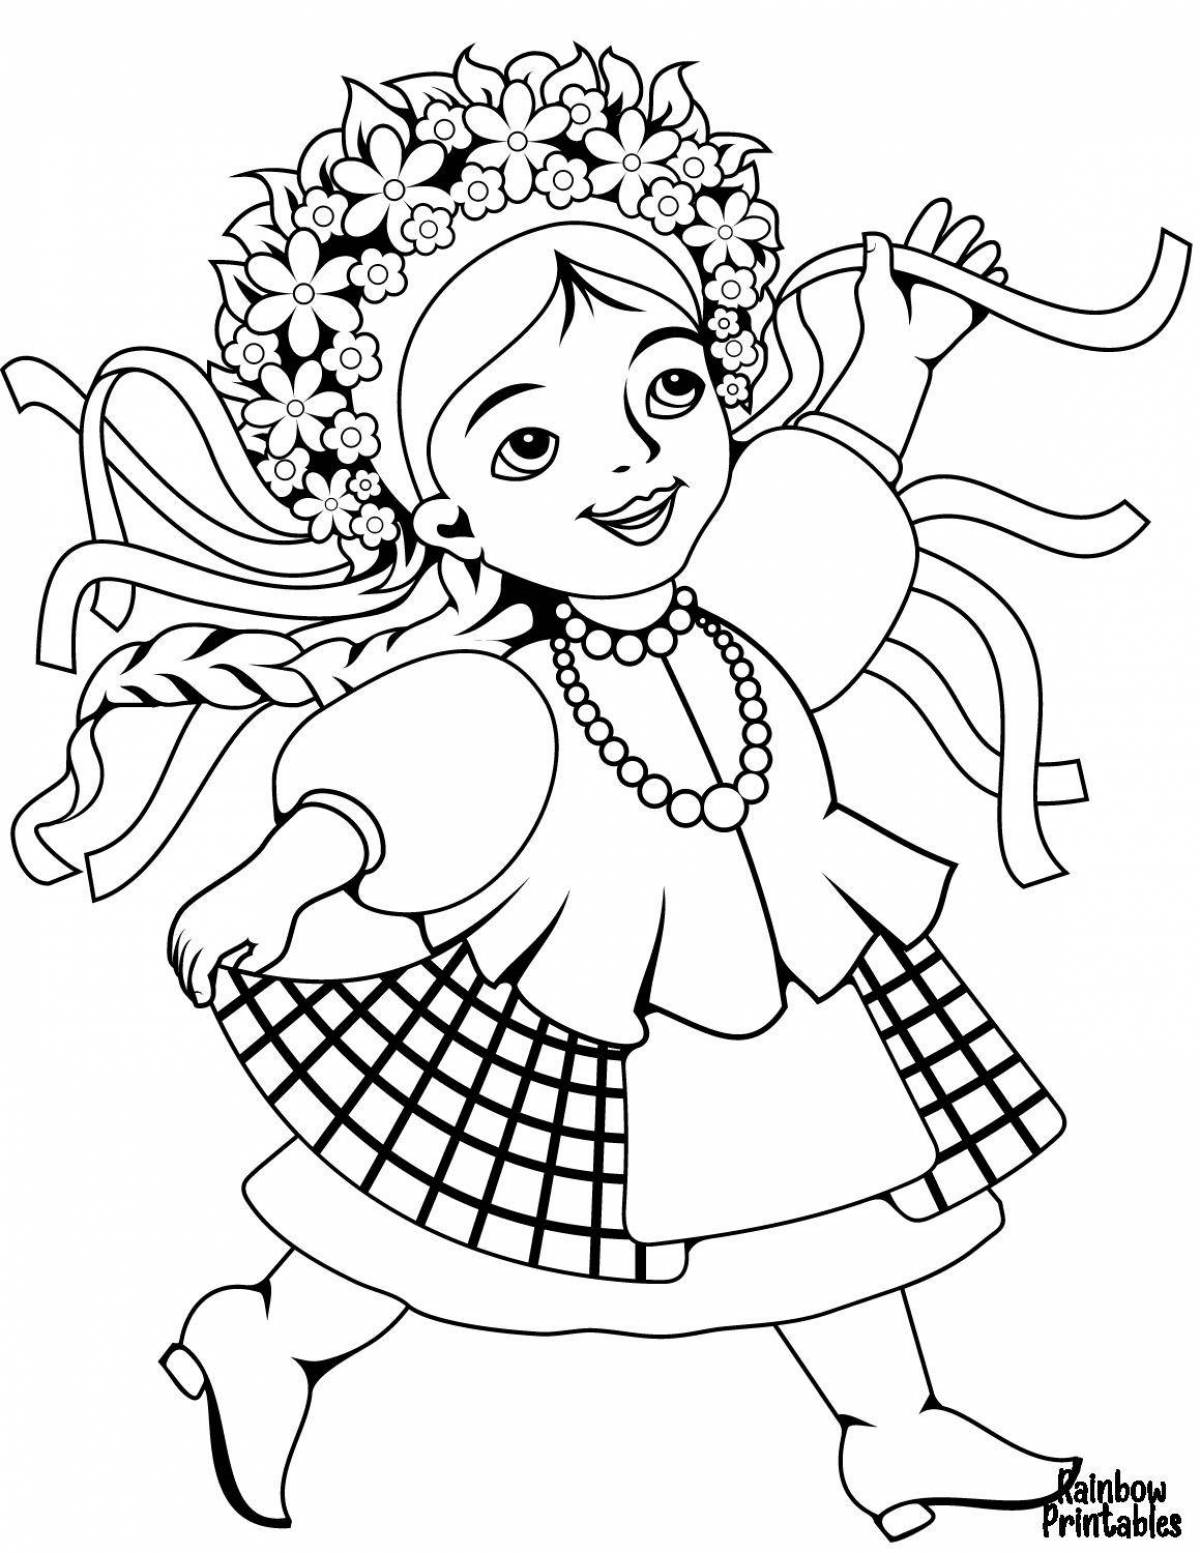 Attractive Ukrainian national costume coloring page